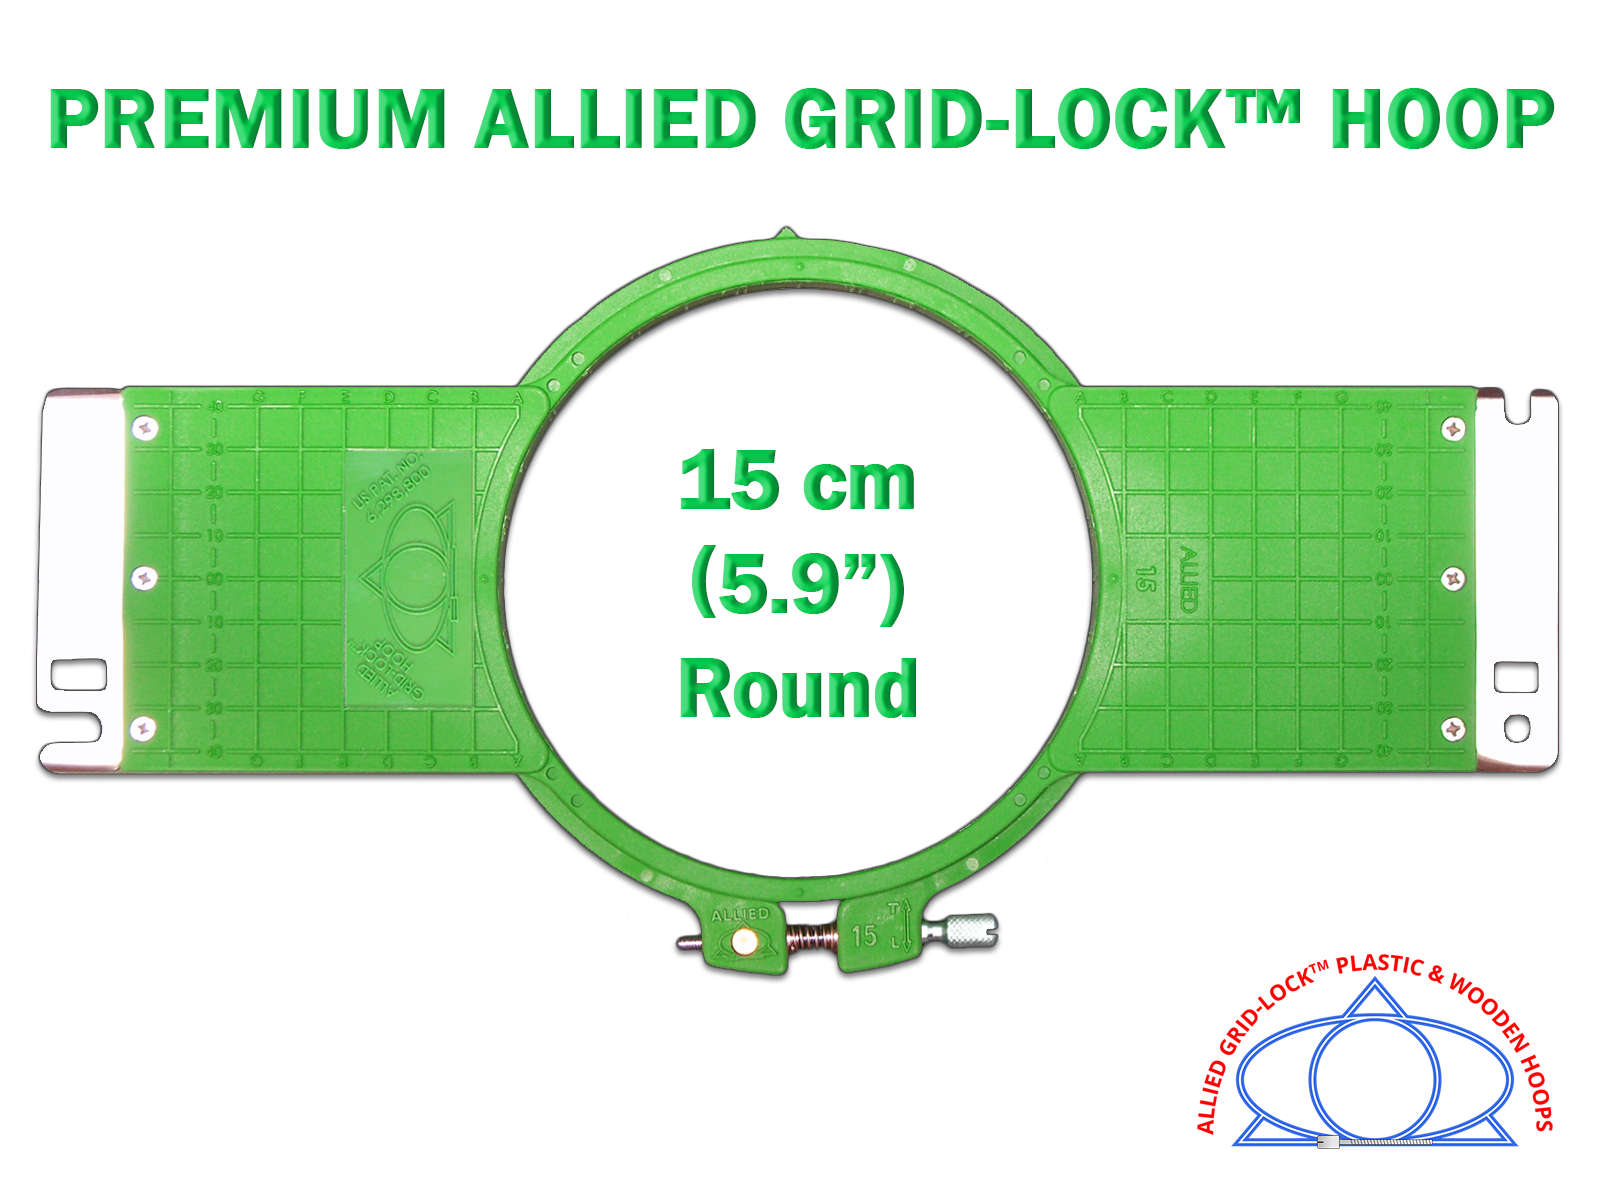 Allied Gridlock Hoop for Avance 5.9" Round Questions & Answers